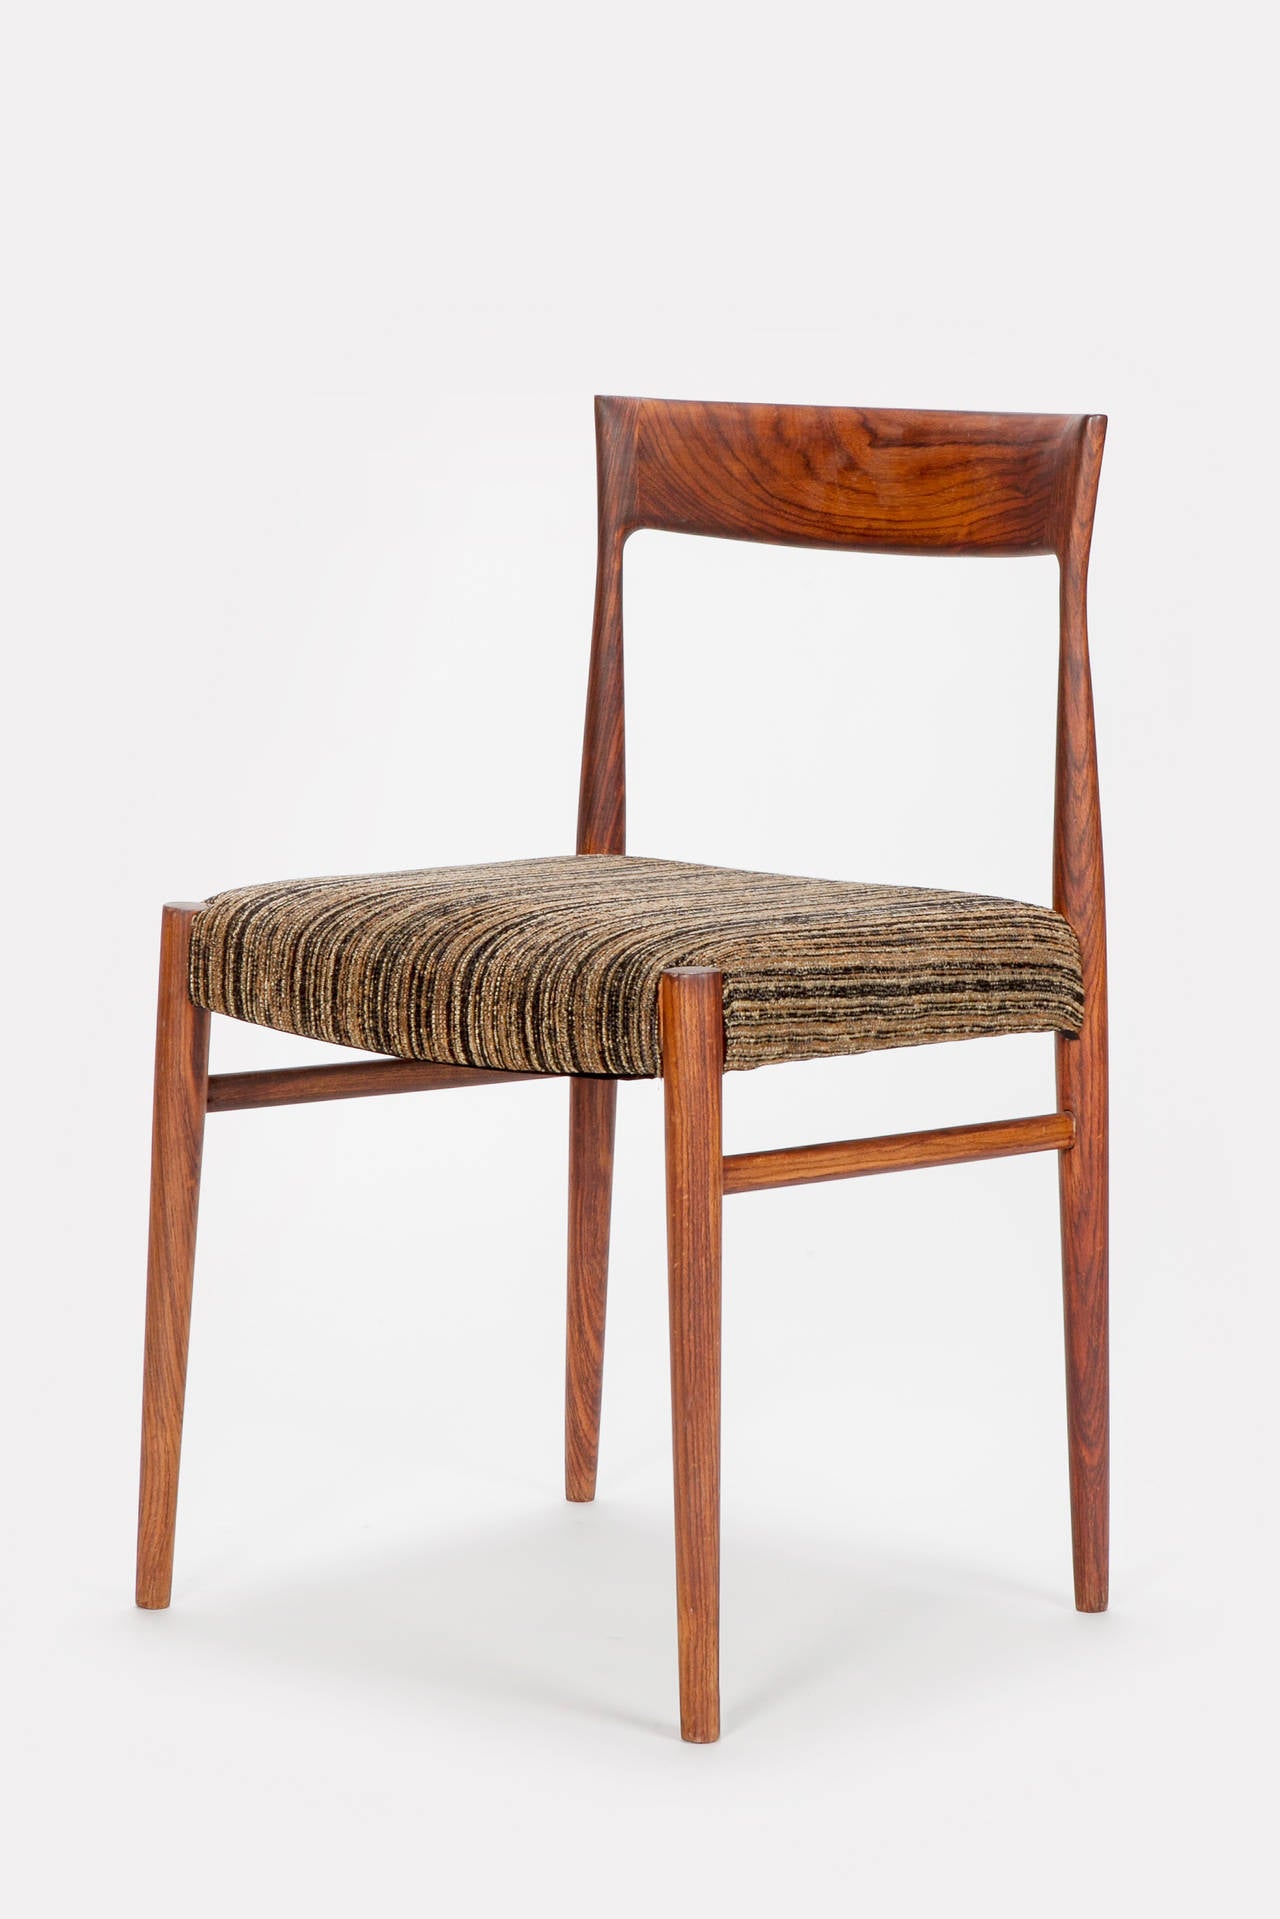 Set of 4 danish Rosewood Chairs from the 1960's. The chairs were distributed by Casala. Beautiful grain in wood, refurbished and reupholstered in a fine cotton fabric!